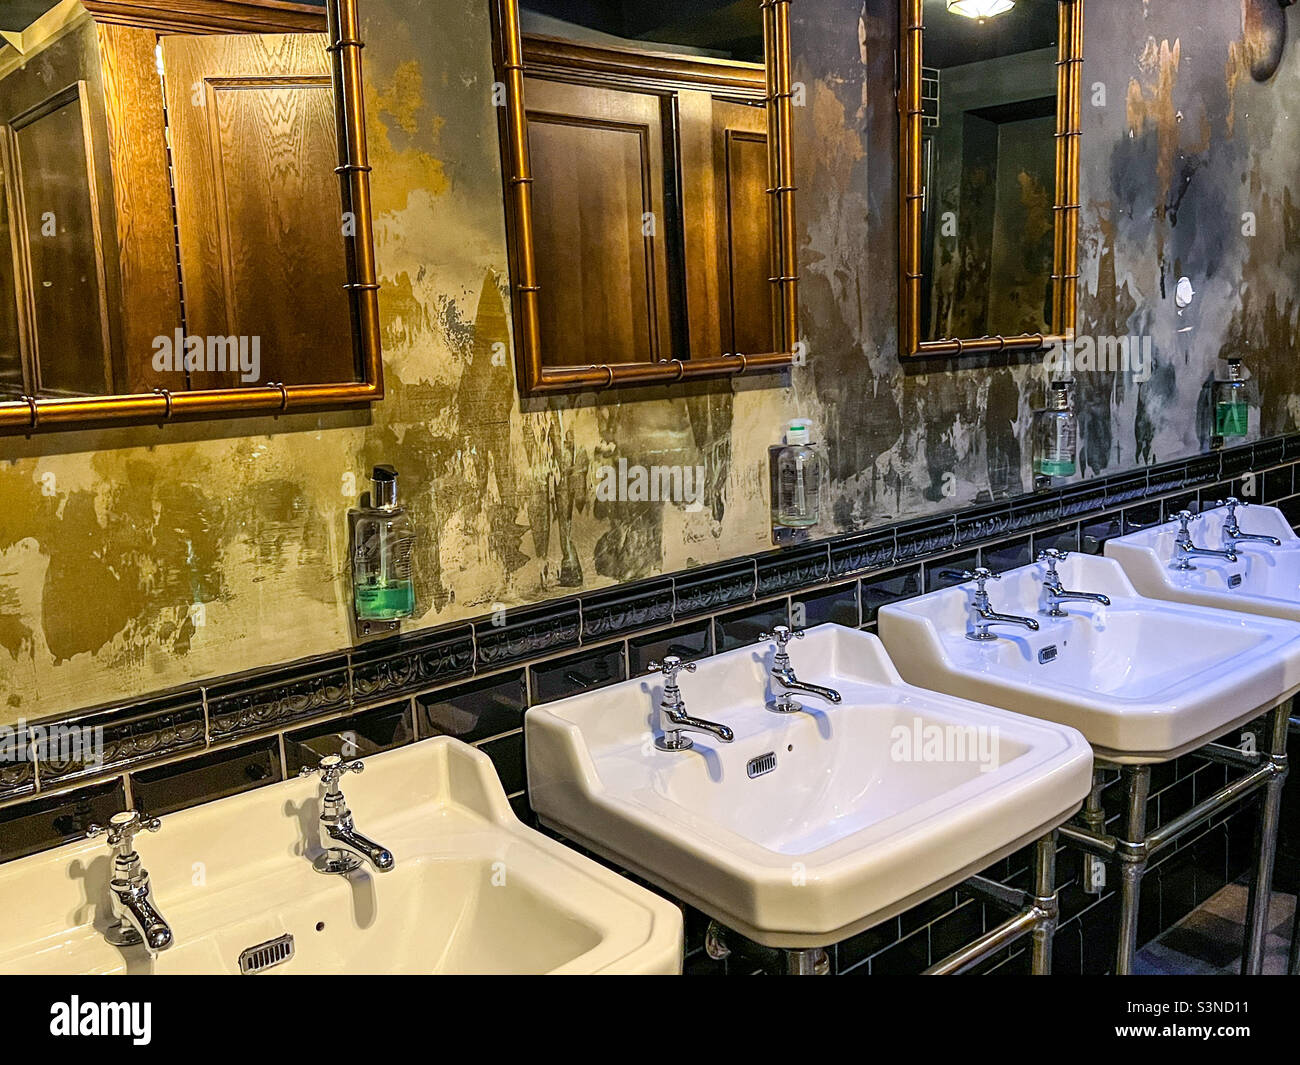 Trendy old fashioned wash sinks in bar toilets Stock Photo